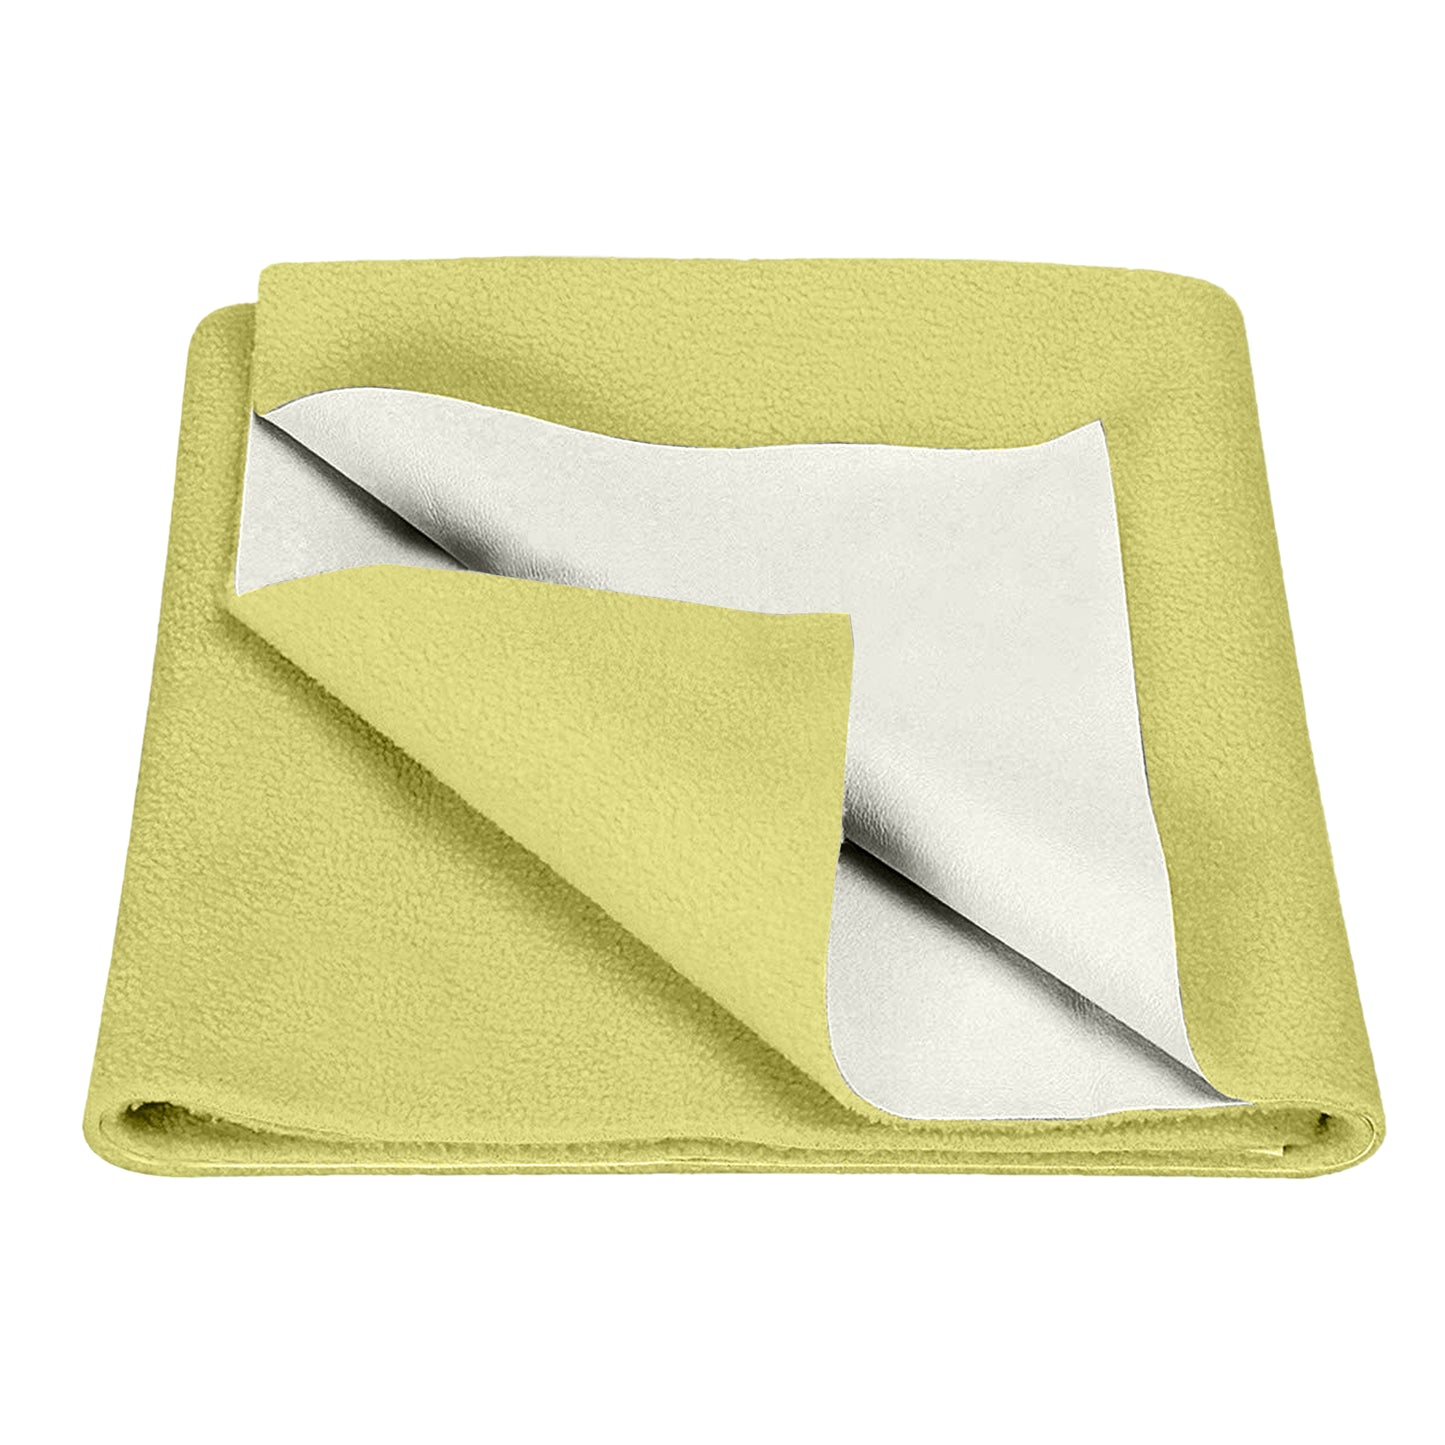 Waterproof Quick Dry Protector Sheet, Baby Bed Protector (140 X 100 CM), Pack of 1 -YELLOW